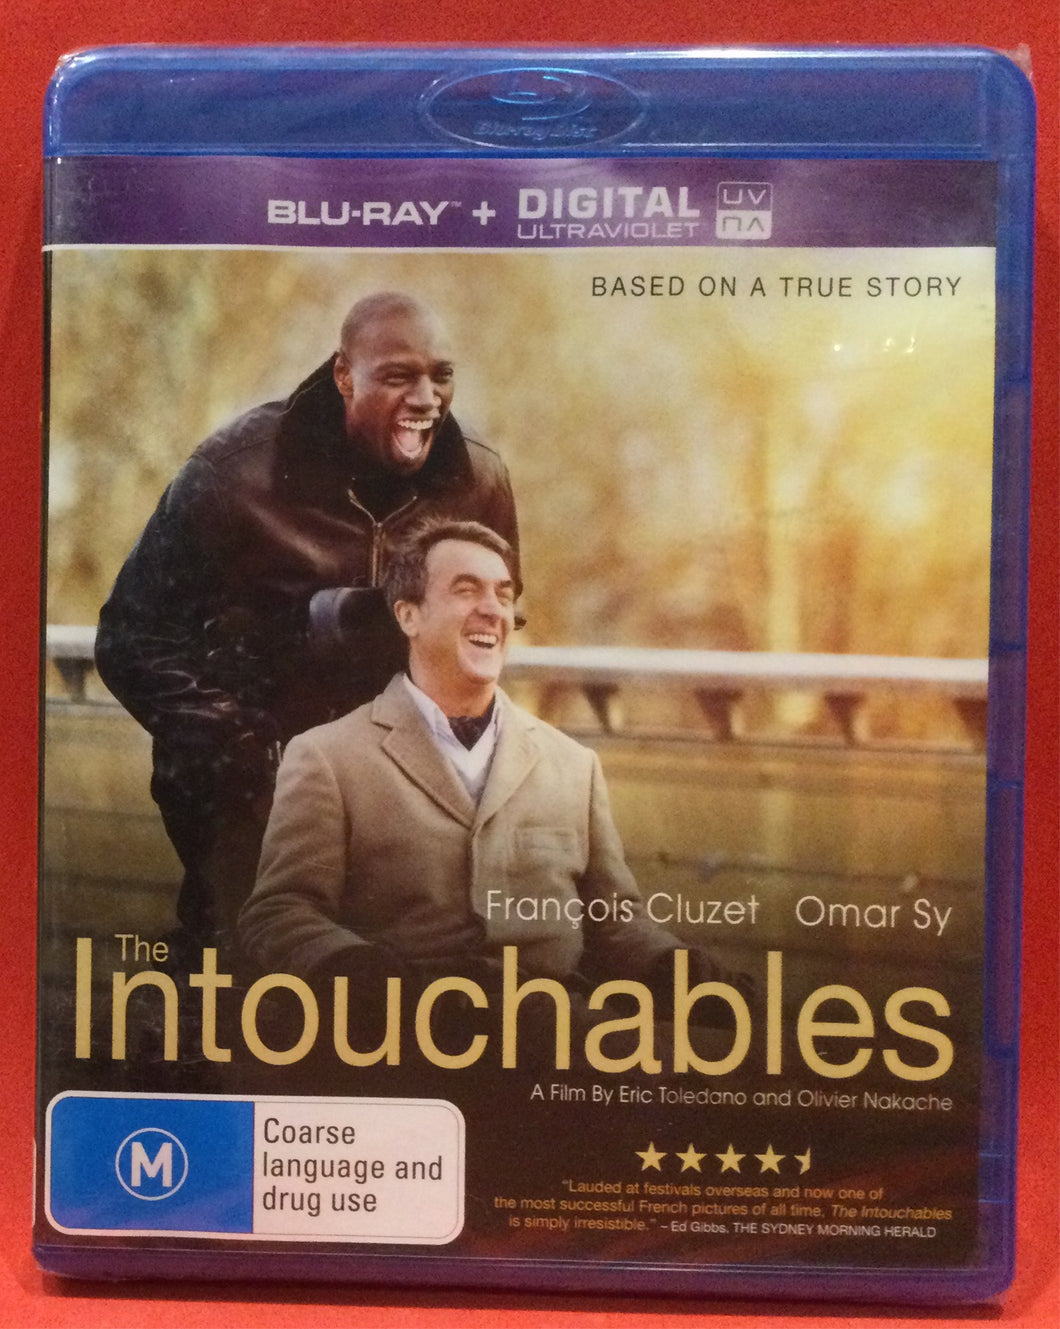 INTOUCHABLES, THE - BLU-RAY DVD (SEALED)